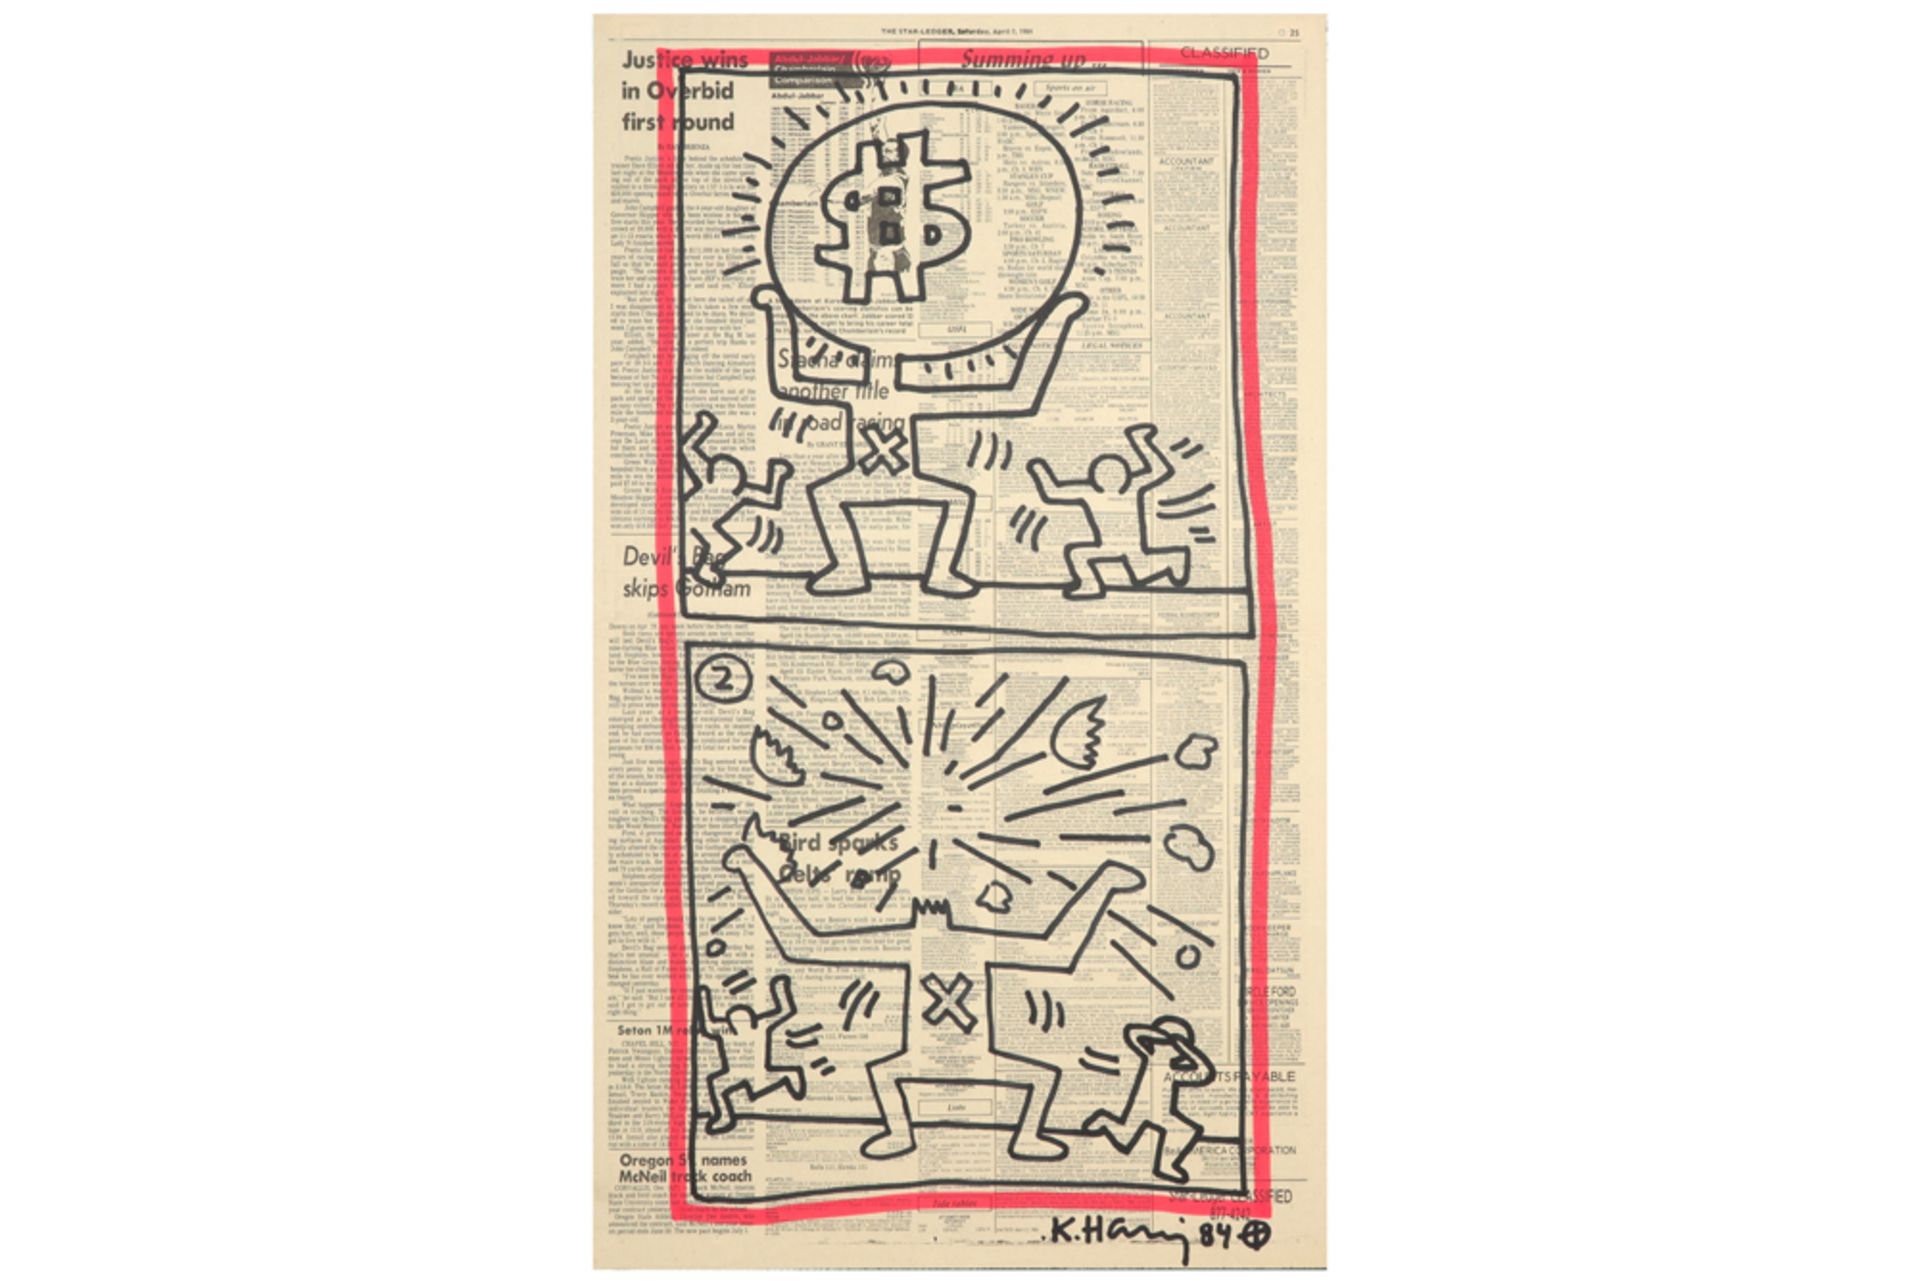 large Keith Haring signed and (19)84 dated drawing on a page of "The Star Ledger" from New Jersey dd